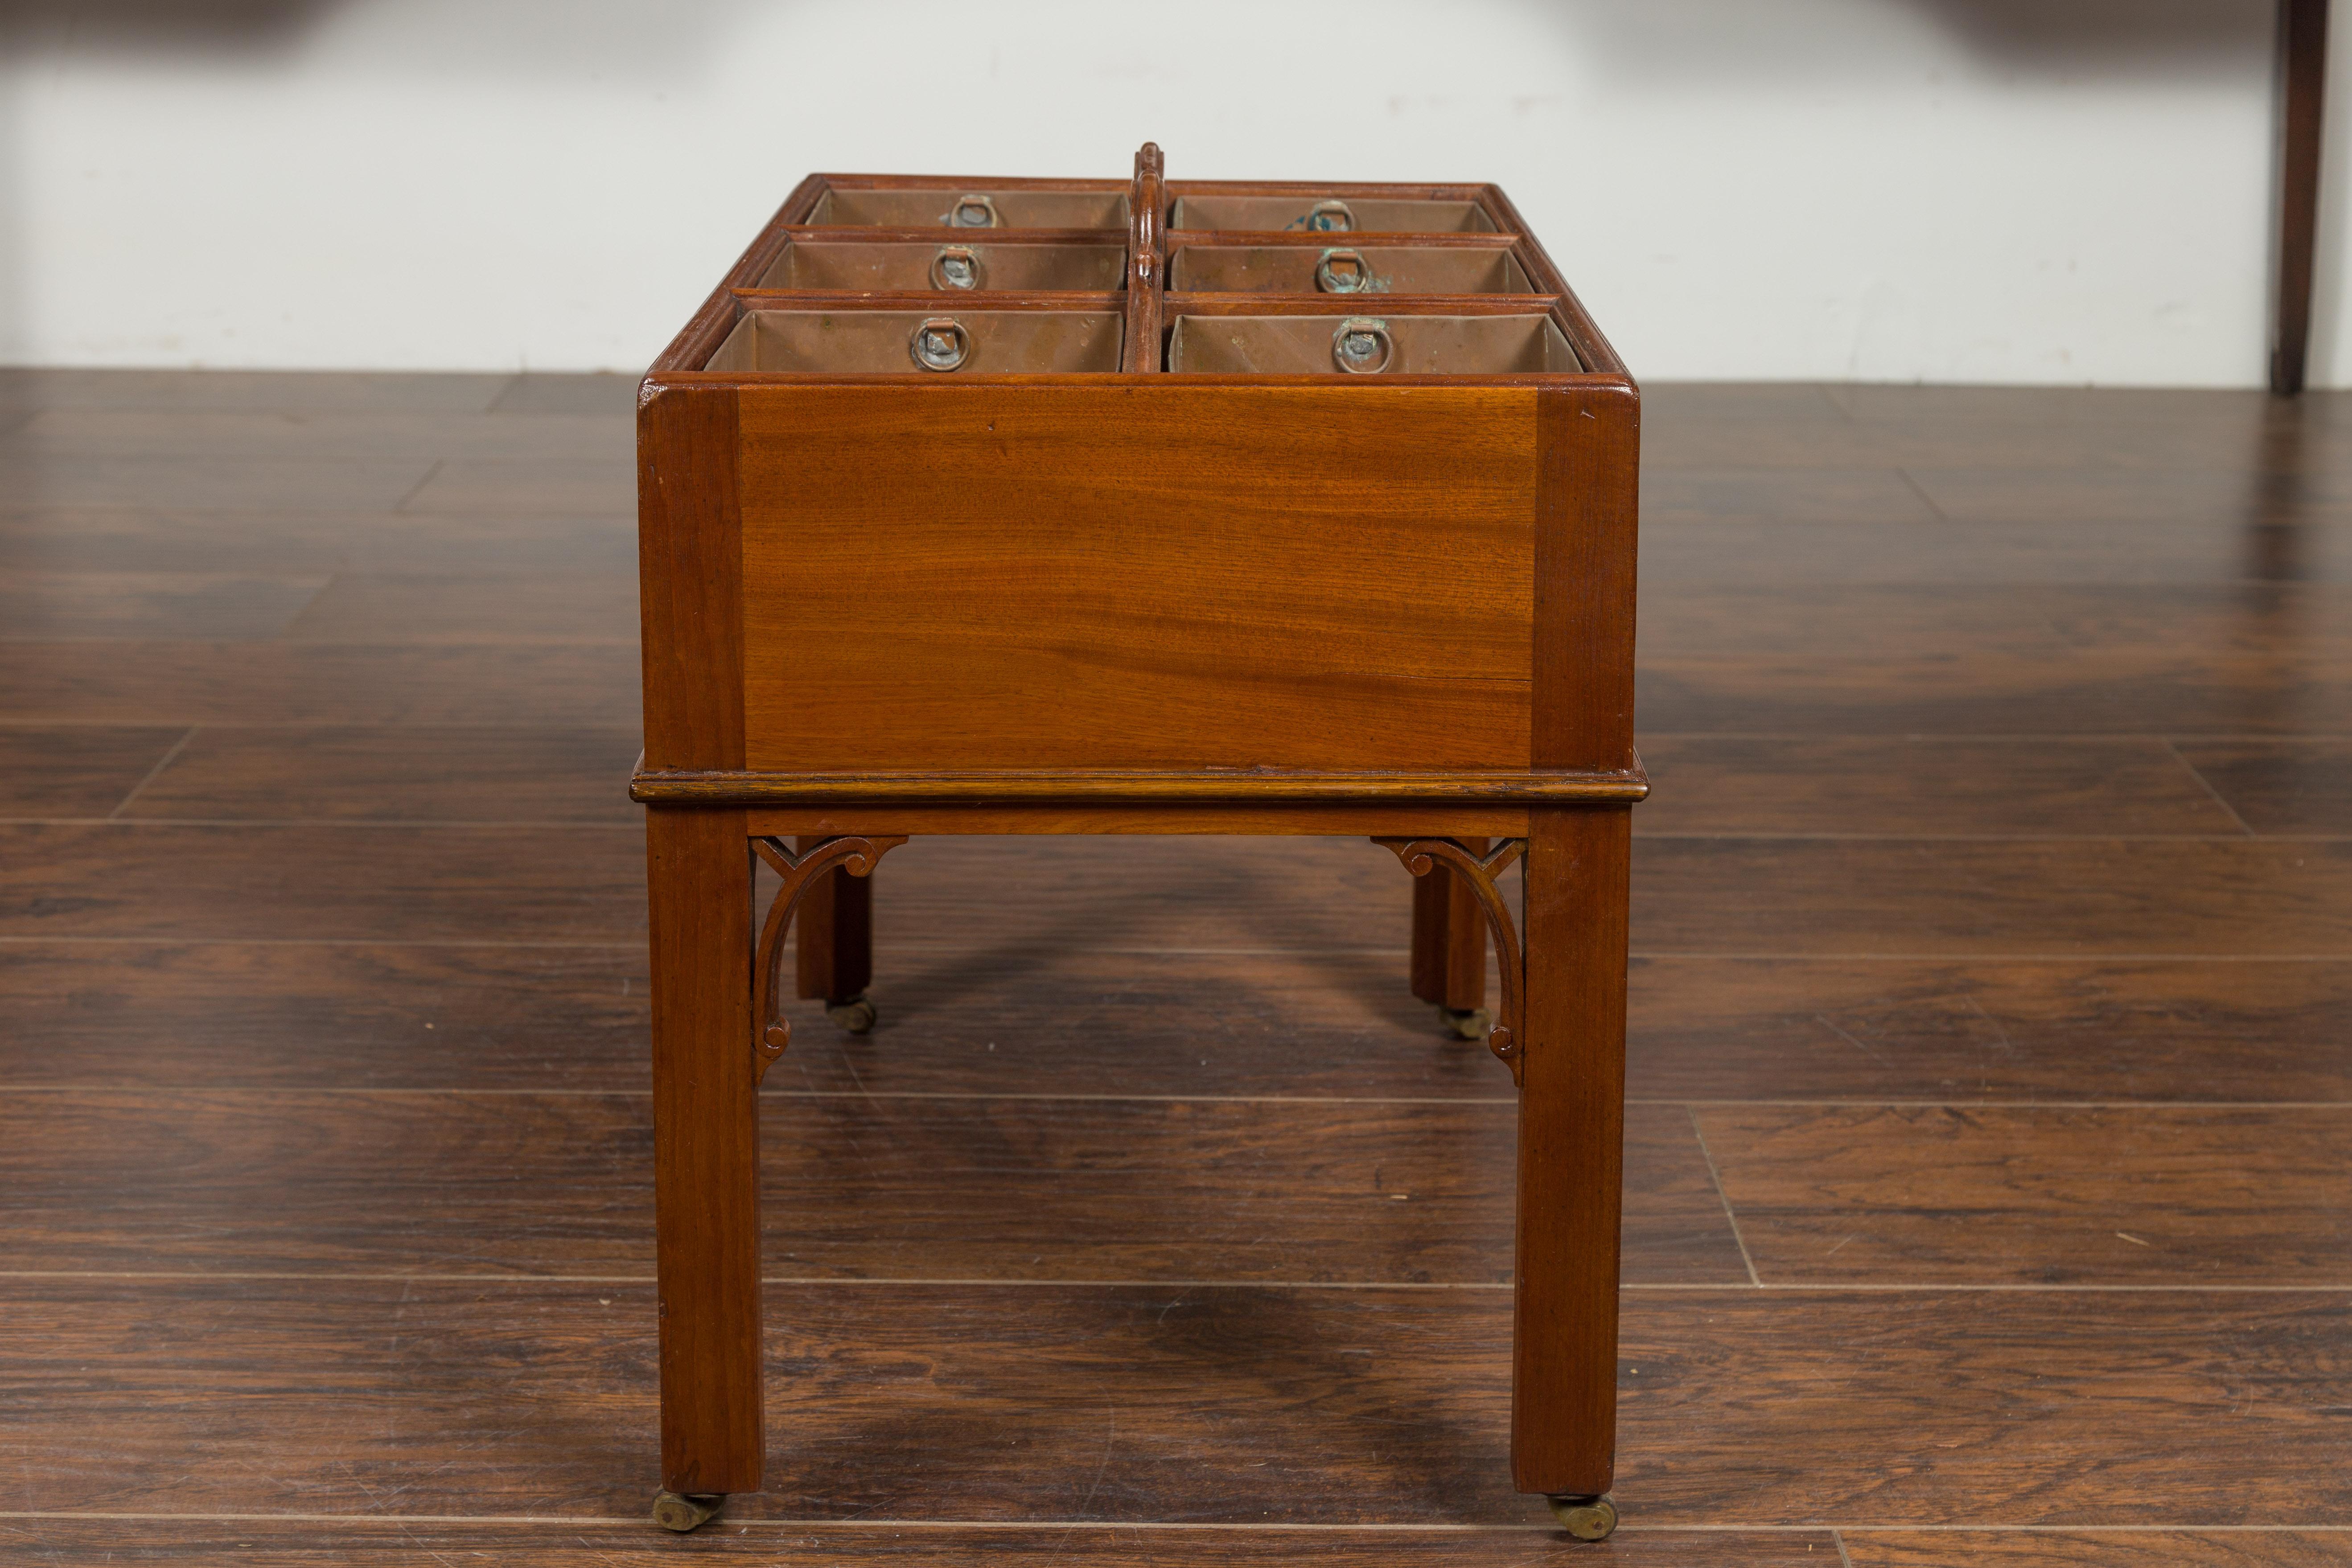 English 1860s Mahogany Copper Lined Wine Caddy with Carved C-Scroll Spandrels For Sale 5